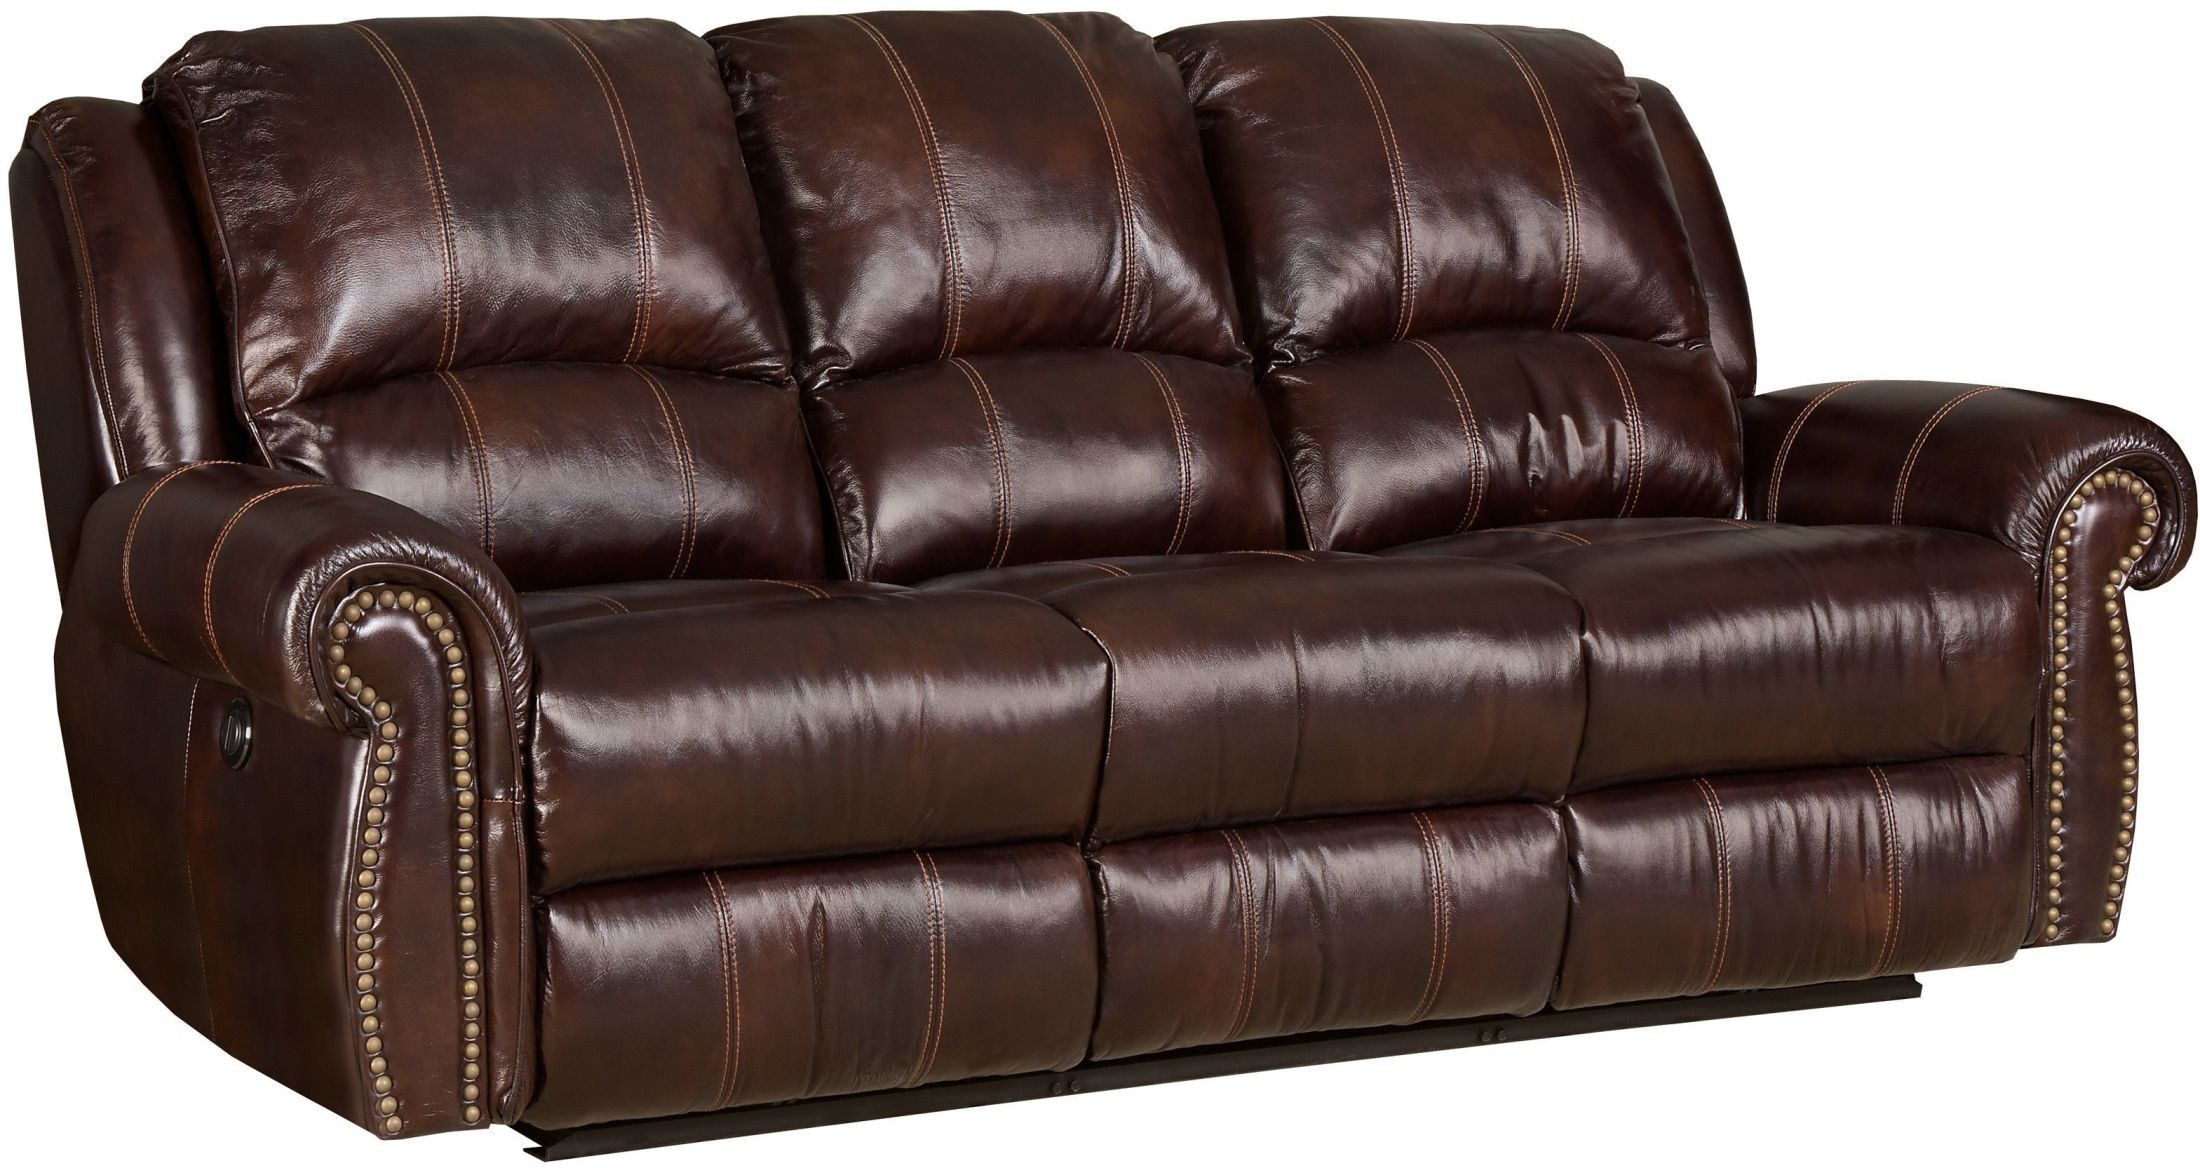 Jackson Brown Power Leather Reclining Sofa From Hooker Within Expedition Brown Power Reclining Sofas (View 7 of 15)